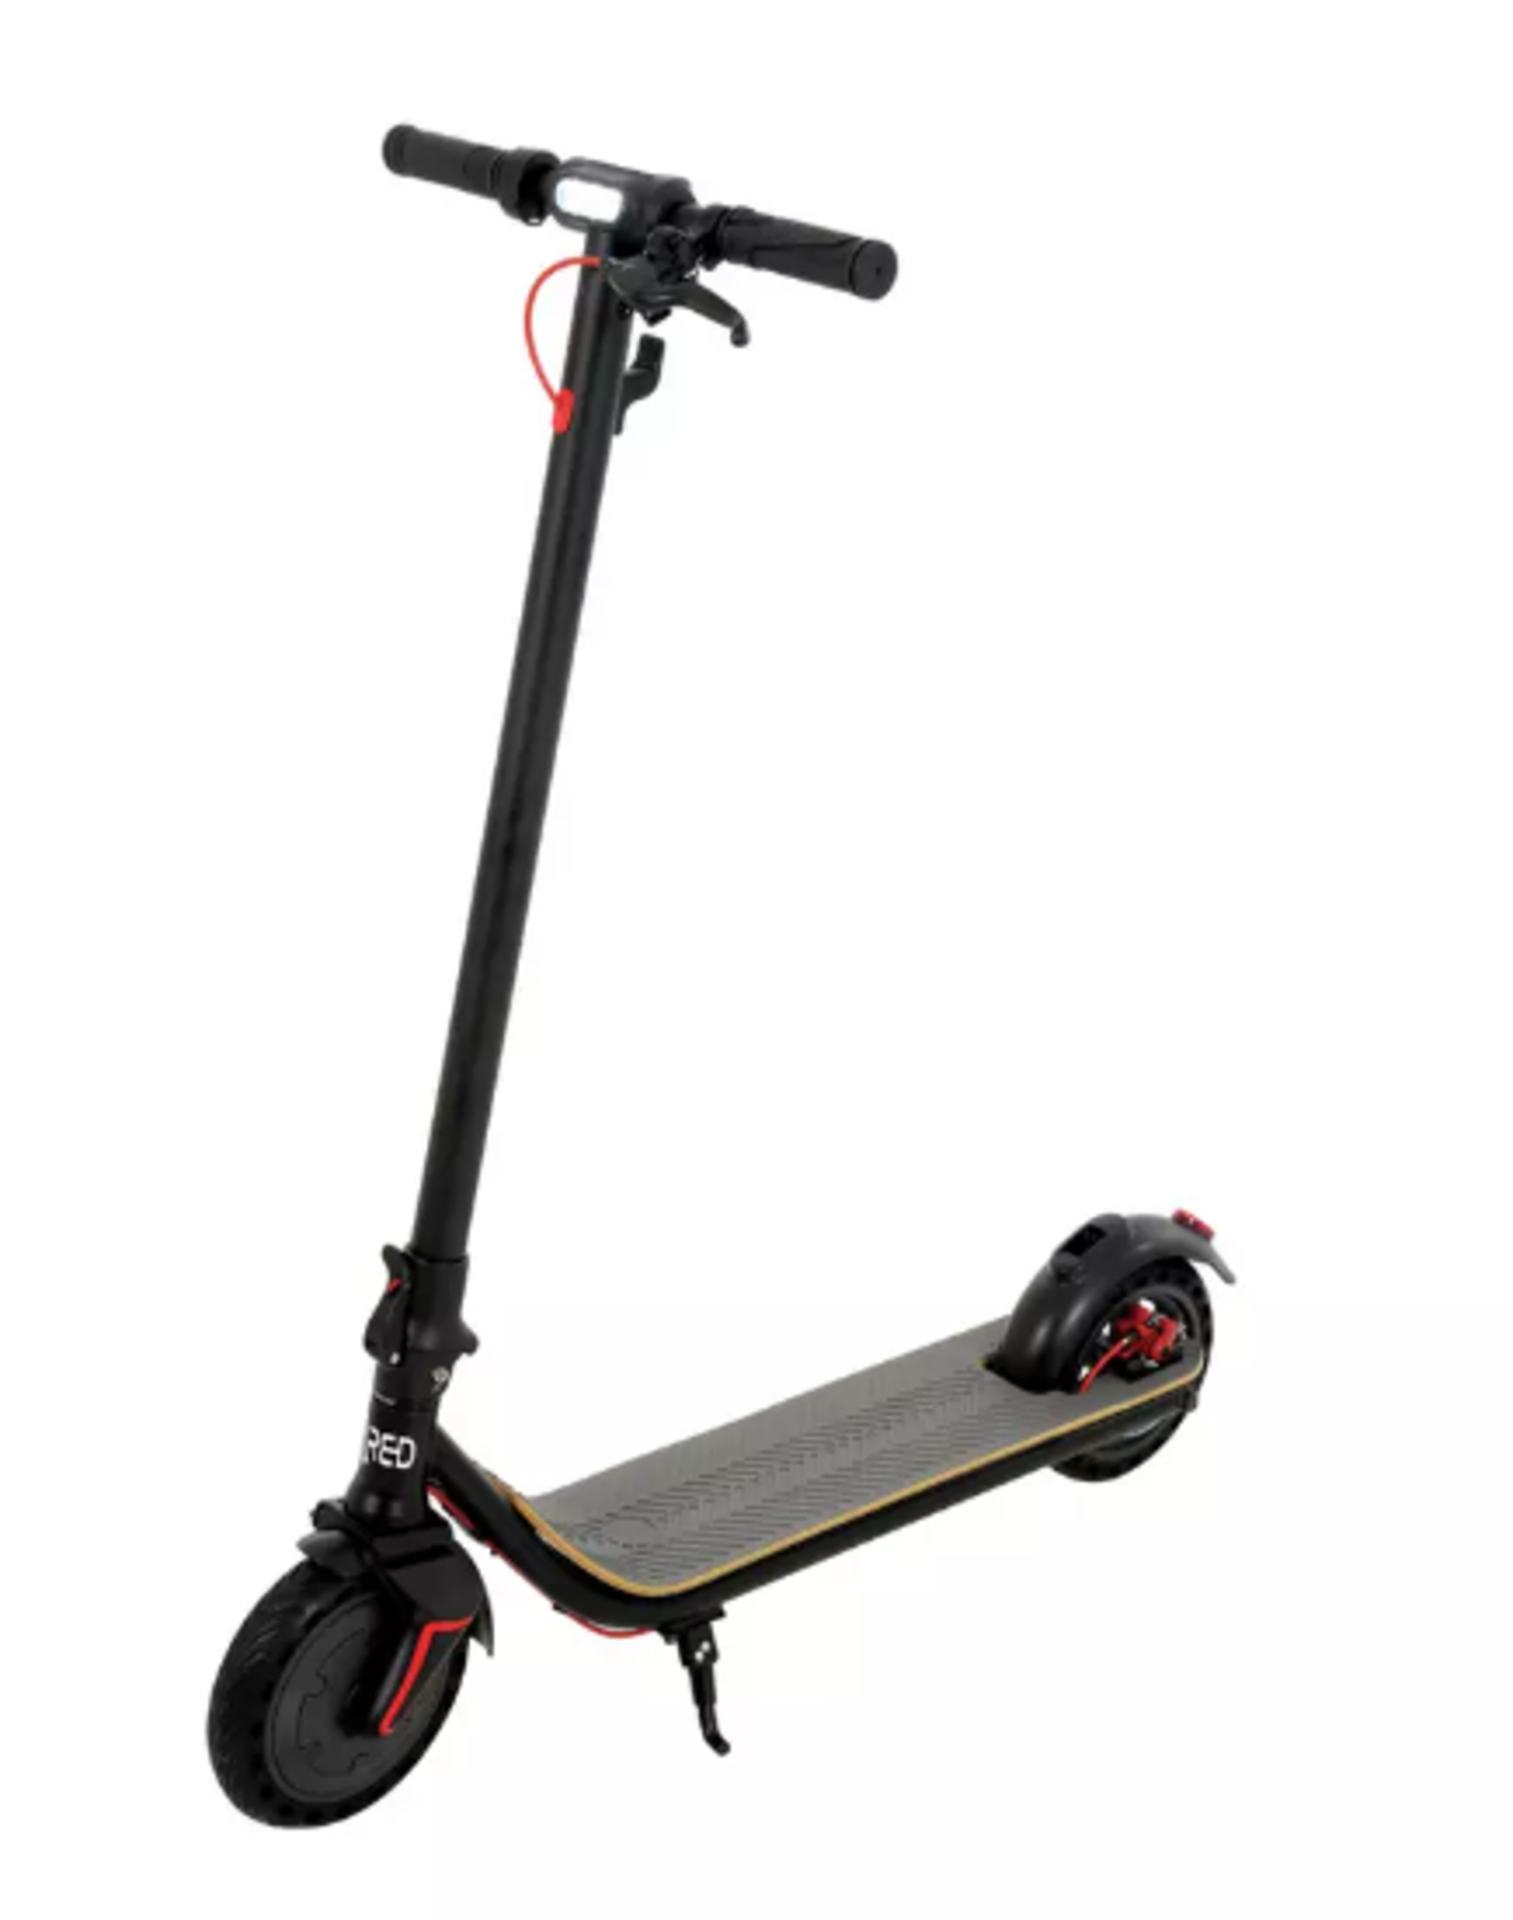 Razor Turbo A Black Label Electric Scooter RRP £175.00. Simply step on and kick off to activate